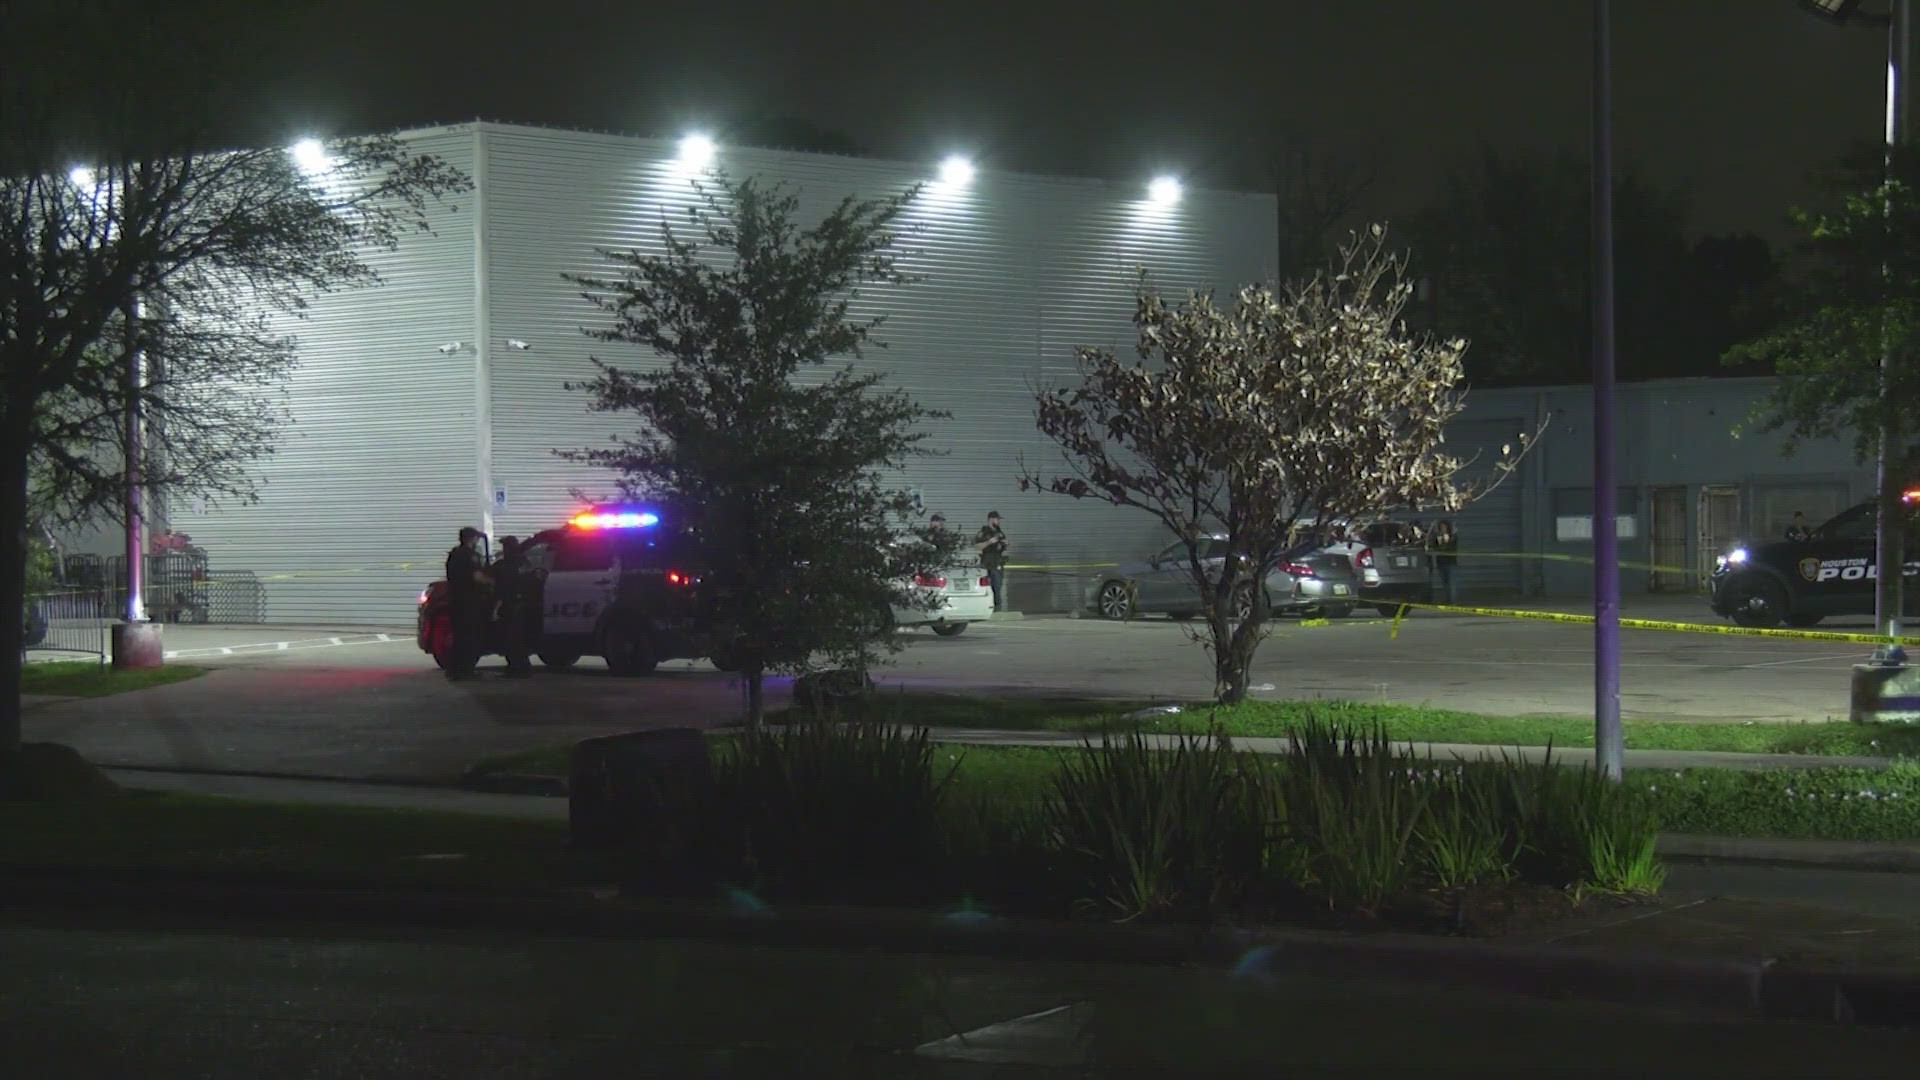 Houston police said a man was found shot to death in the parking lot of a nightclub near the Medical Center late Monday night.